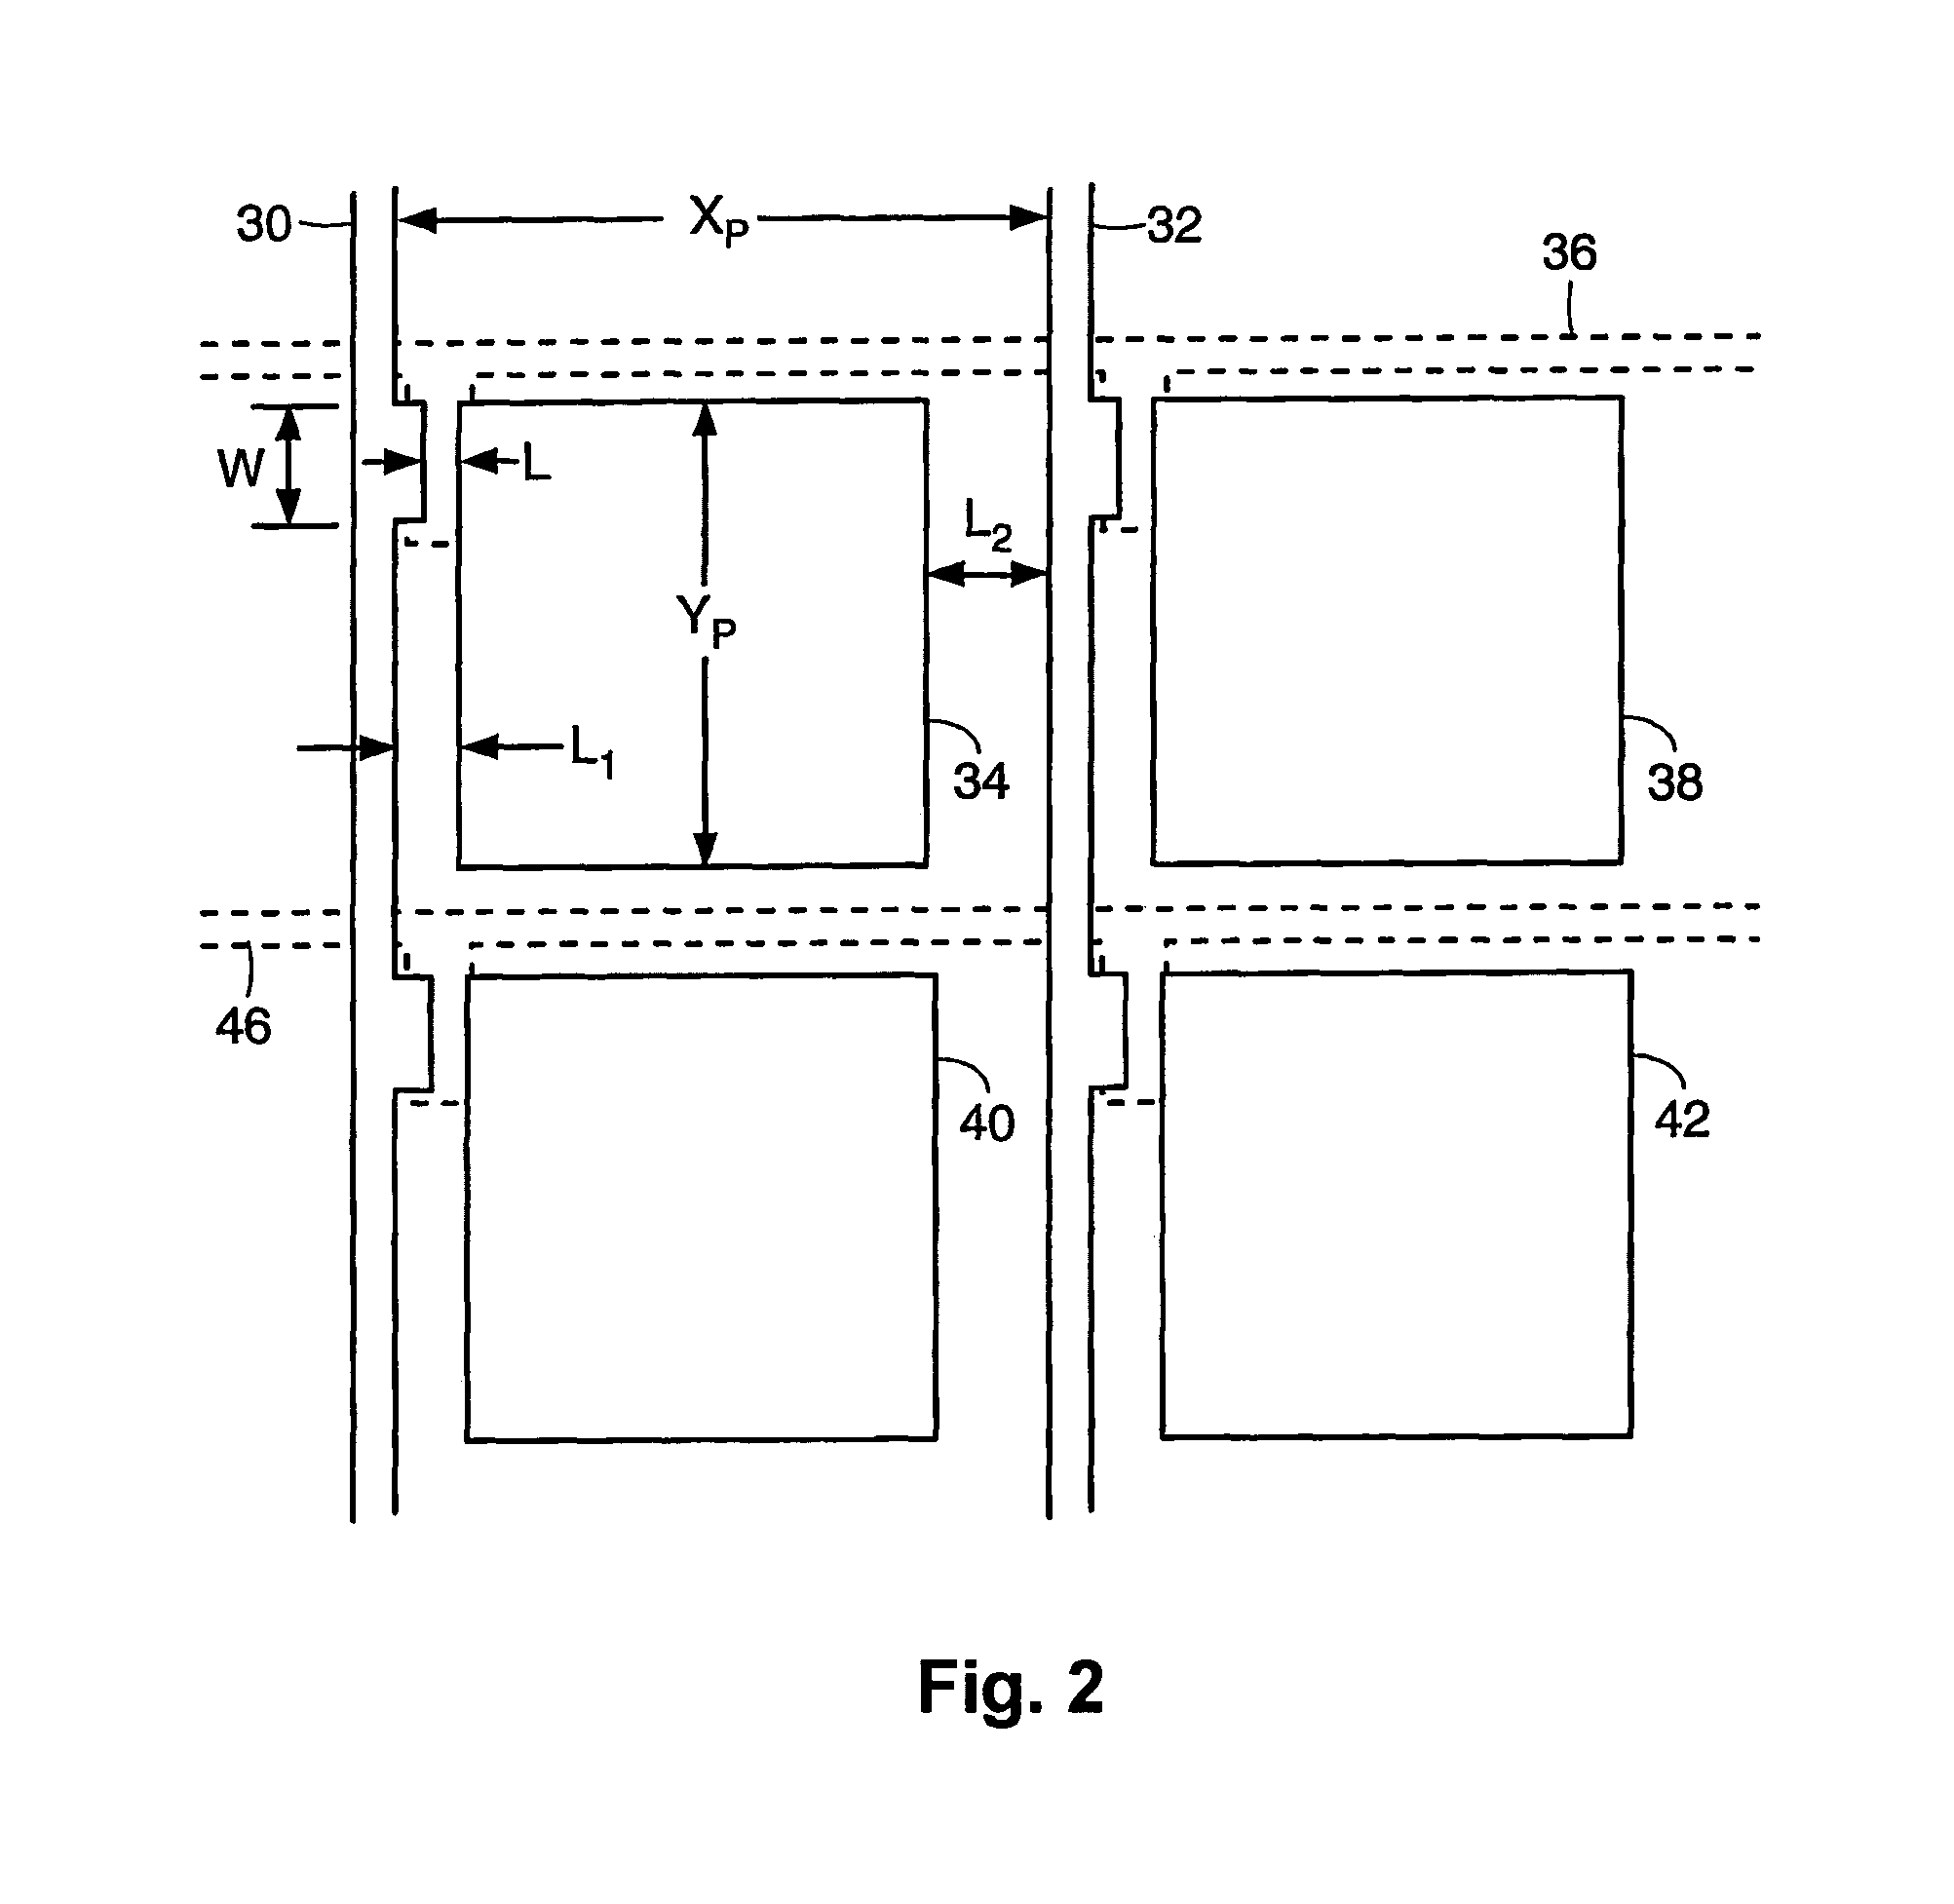 Minimally-patterned semiconductor devices for display applications